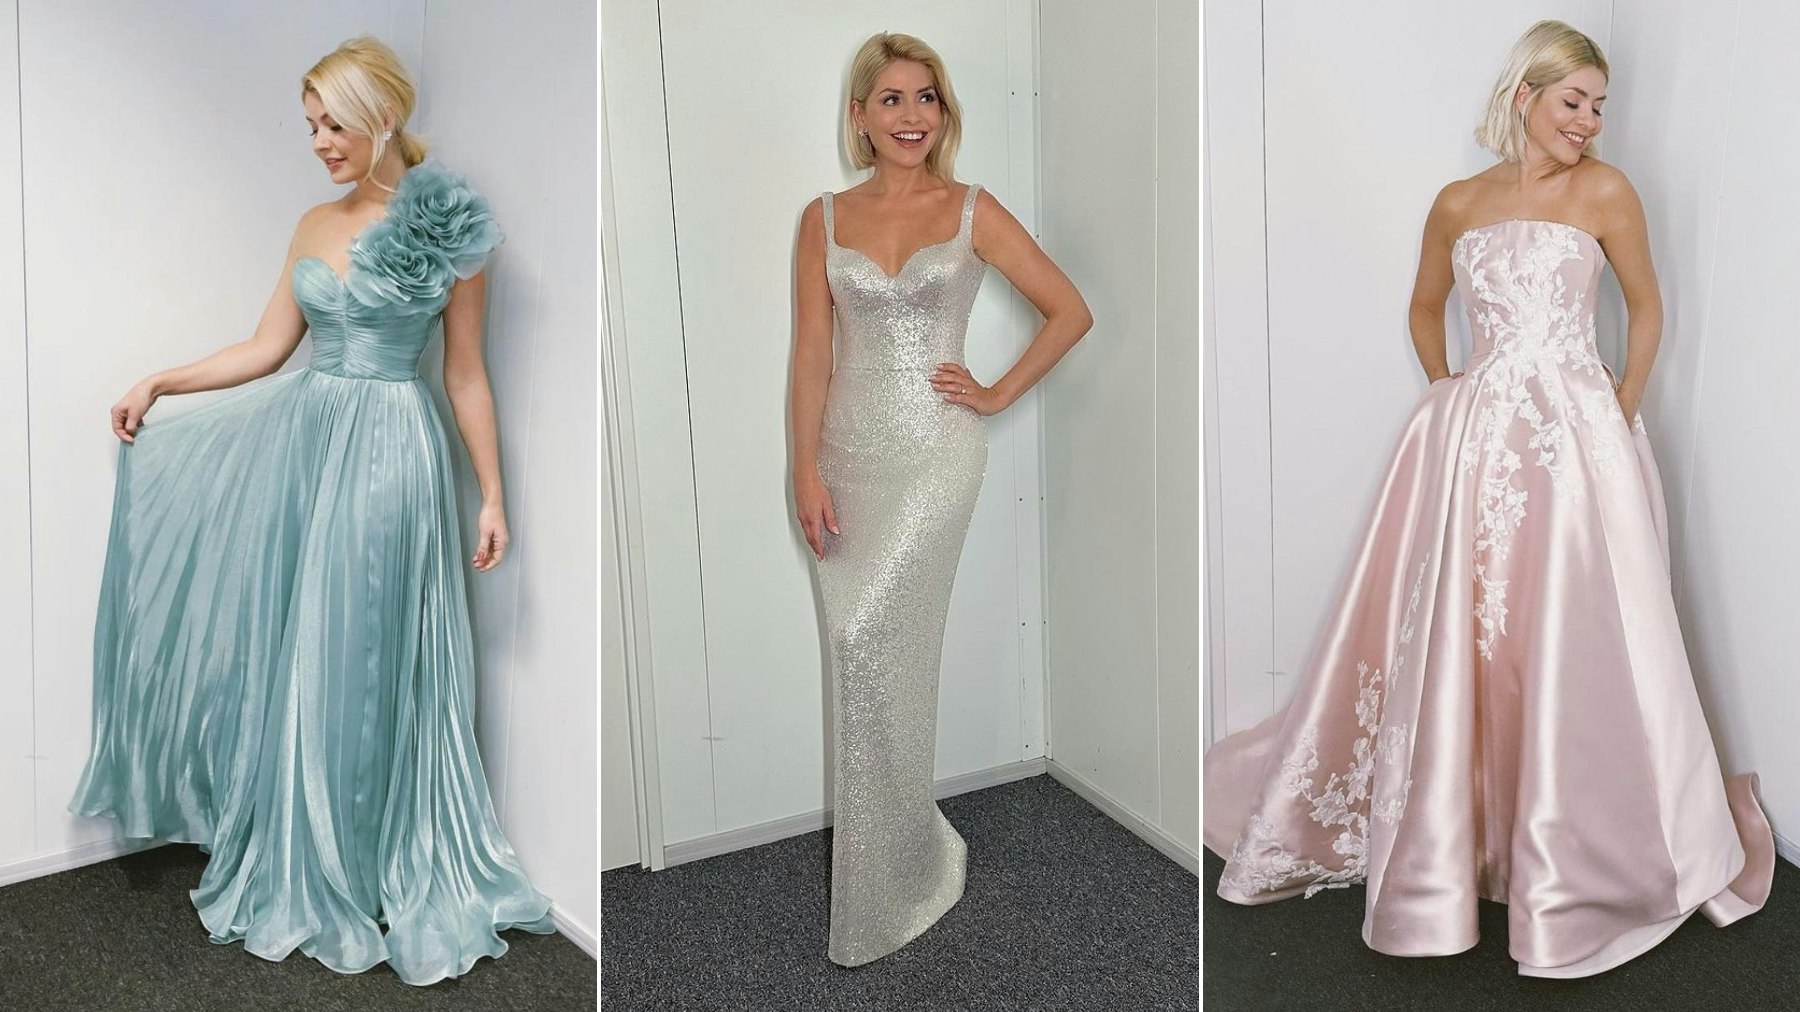 Holly Willoughby's Dancing On Ice Dresses: Where To Buy